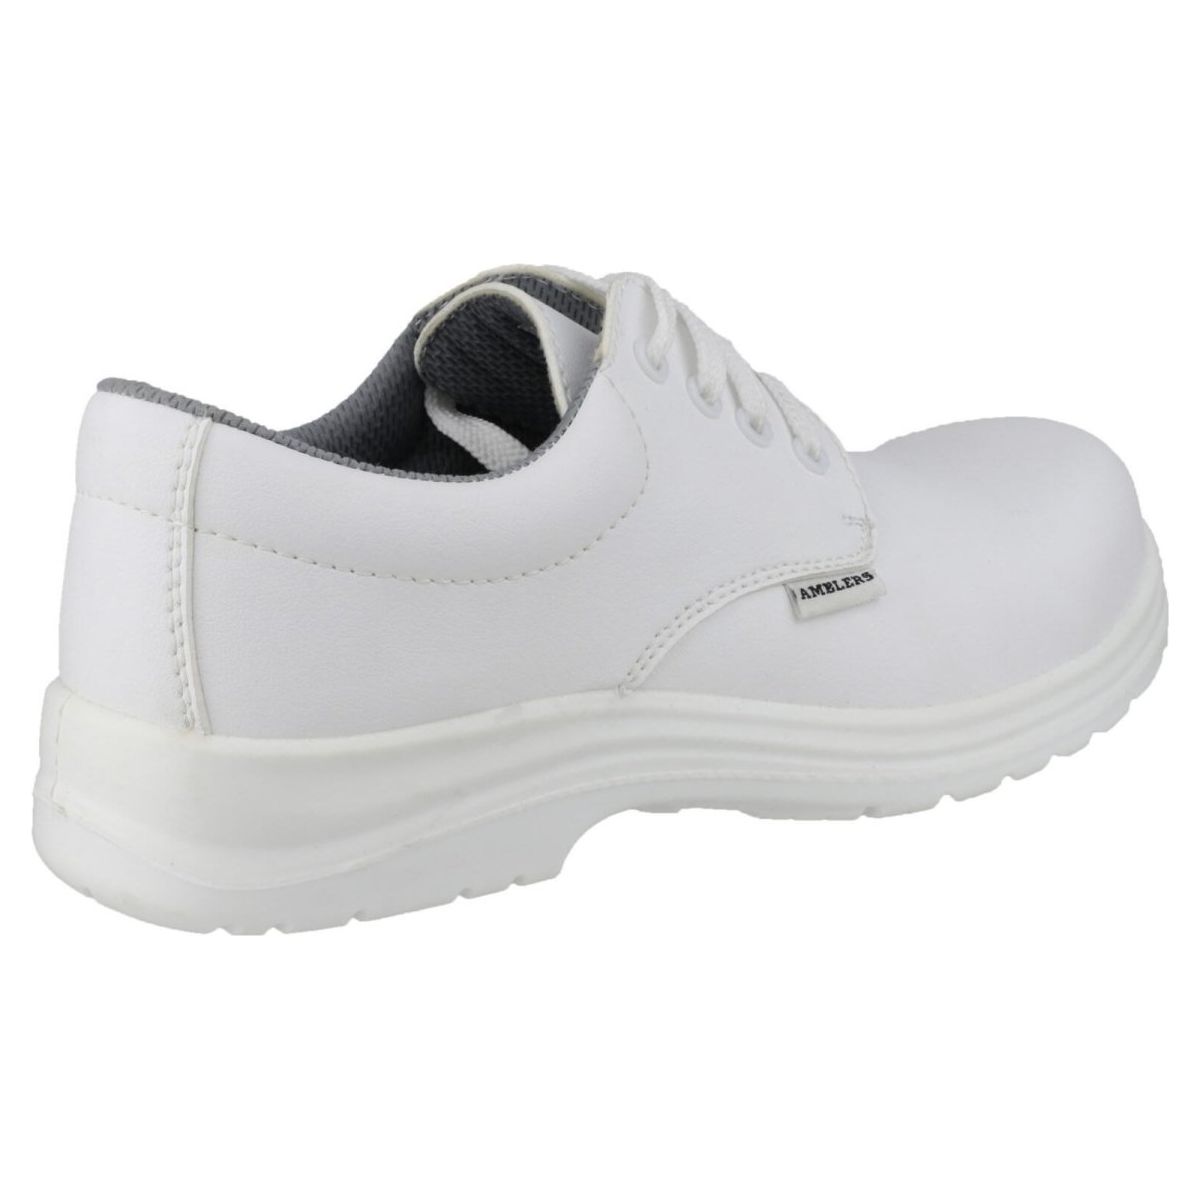 Amblers Fs511 Metal-Free Safety Shoes Mens - workweargurus.com